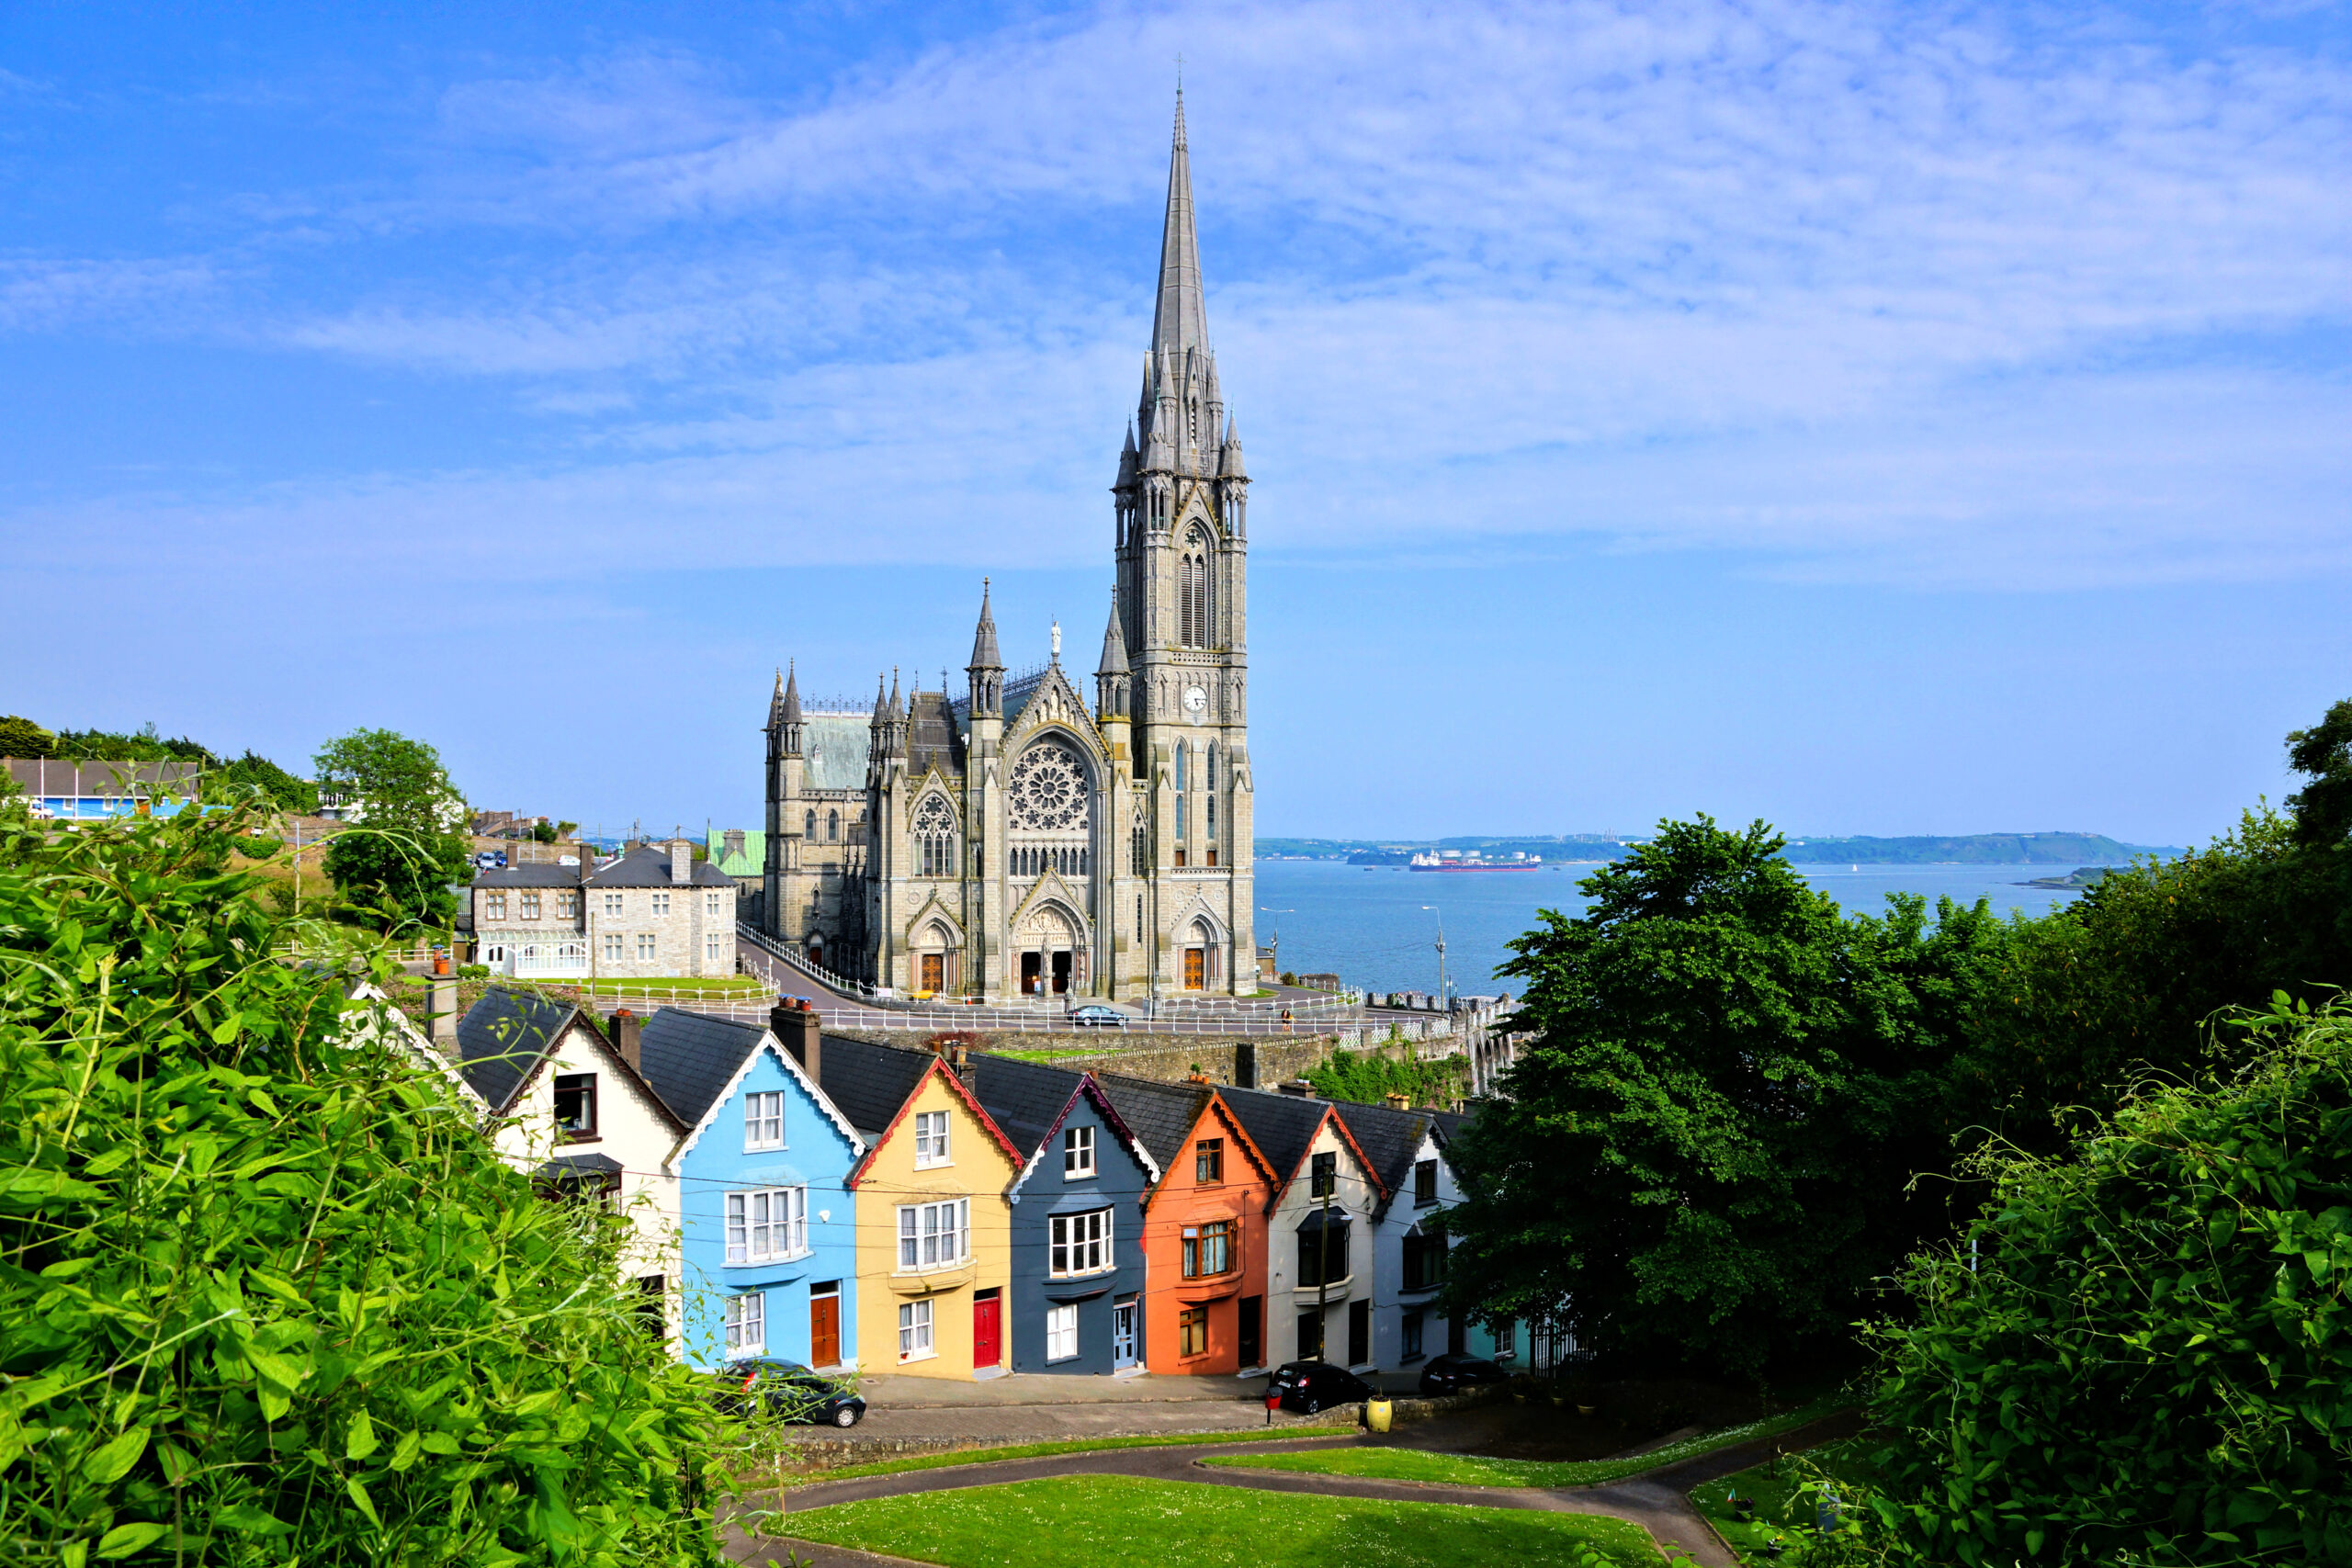 View of the famous colorful deck of cards houses with Cobh's cathedral in the background 